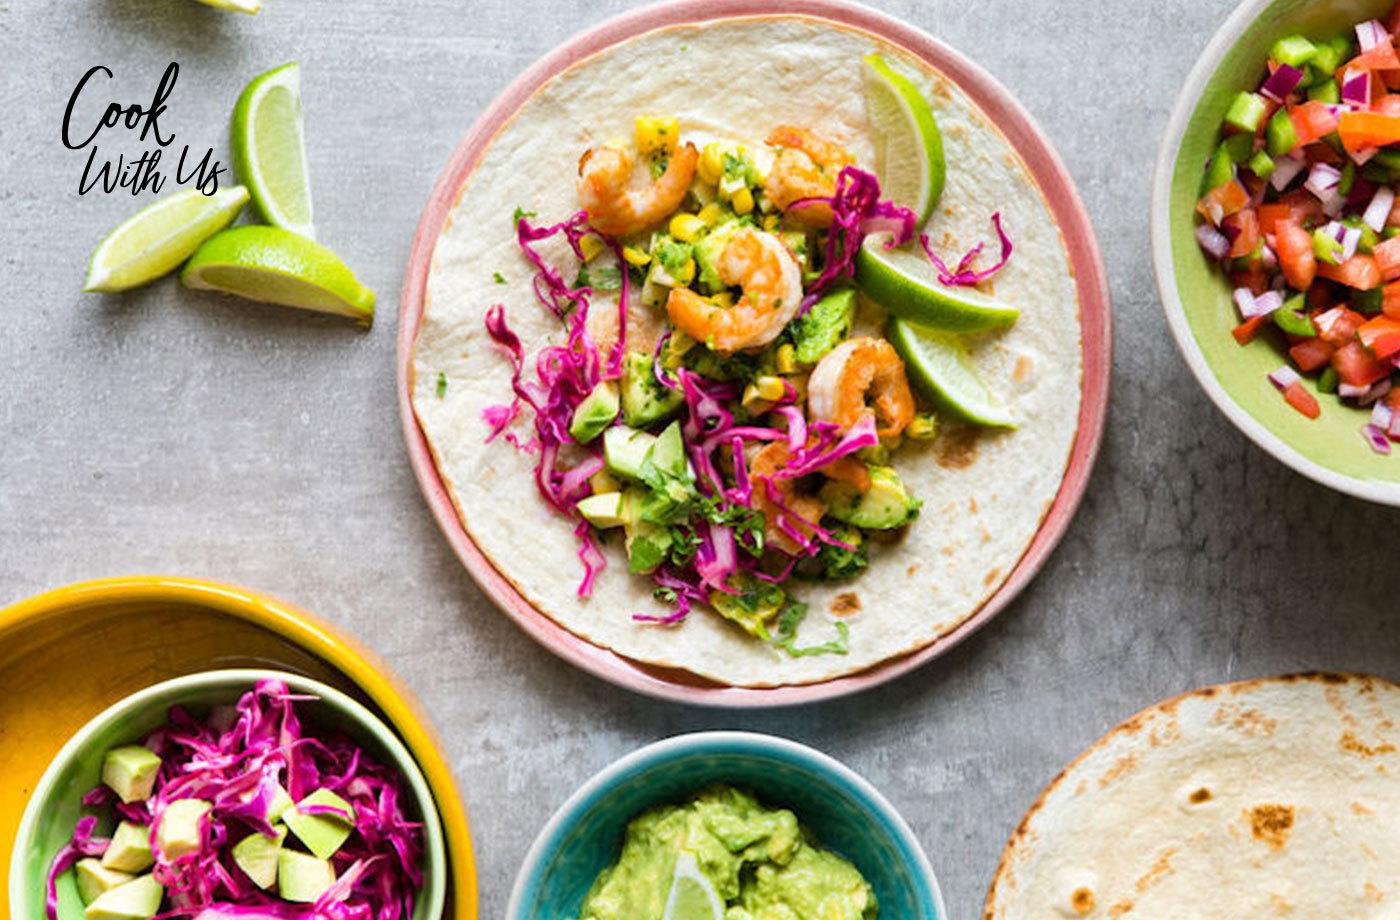 dinner meal plan shrimp tacos with salsa and cabbage on tortilla